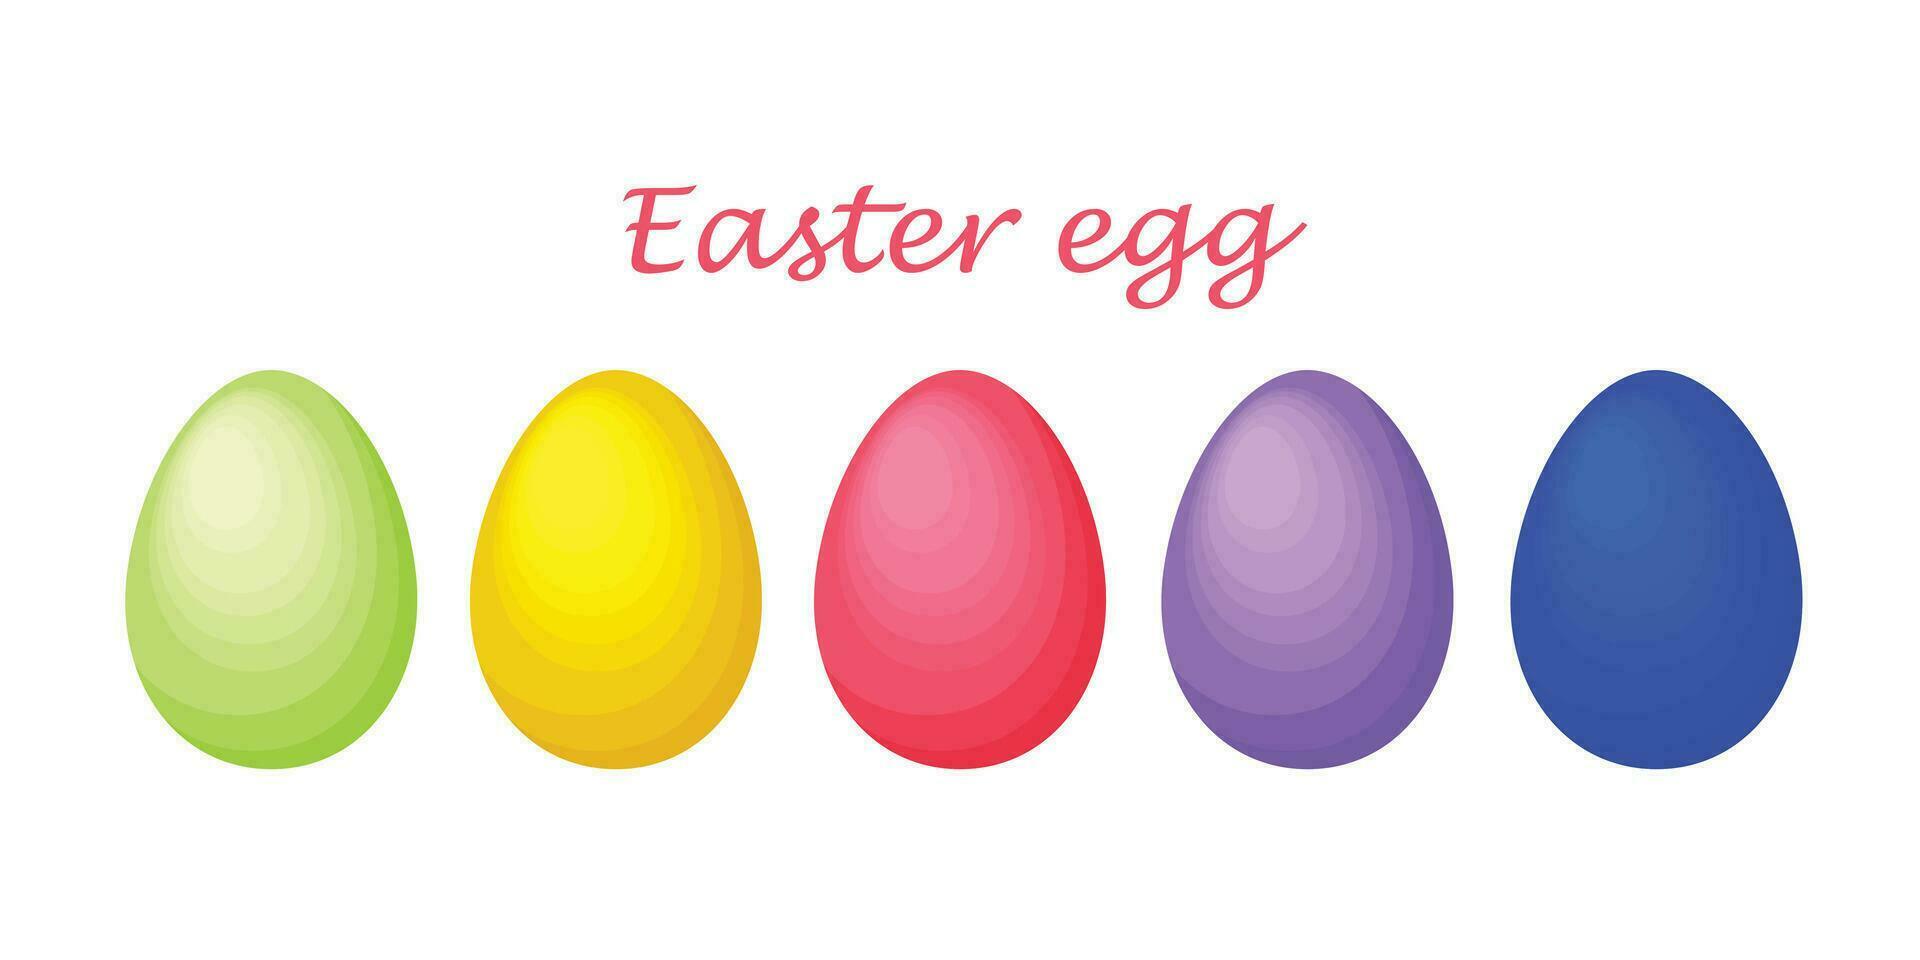 Easter eggs. A set of Easter eggs of different colors. Collection of Easter eggs. Vector illustration